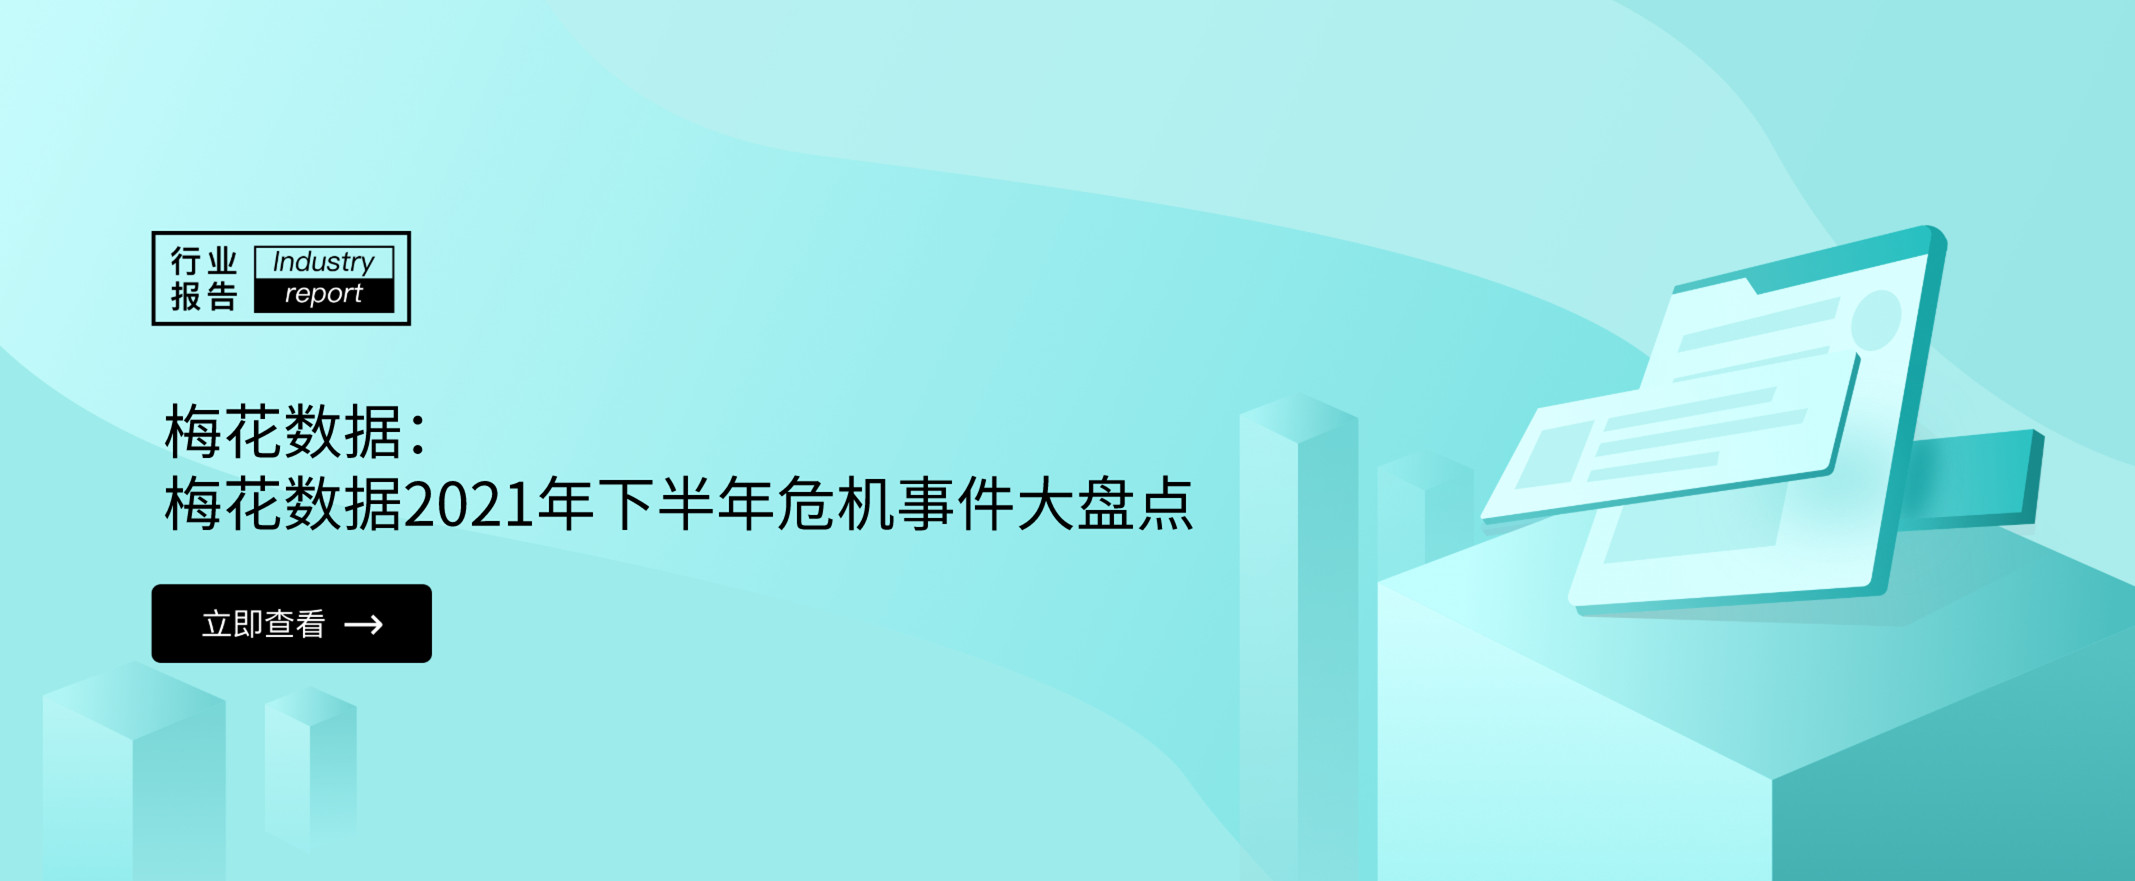 mohodata官网首页轮播banner3